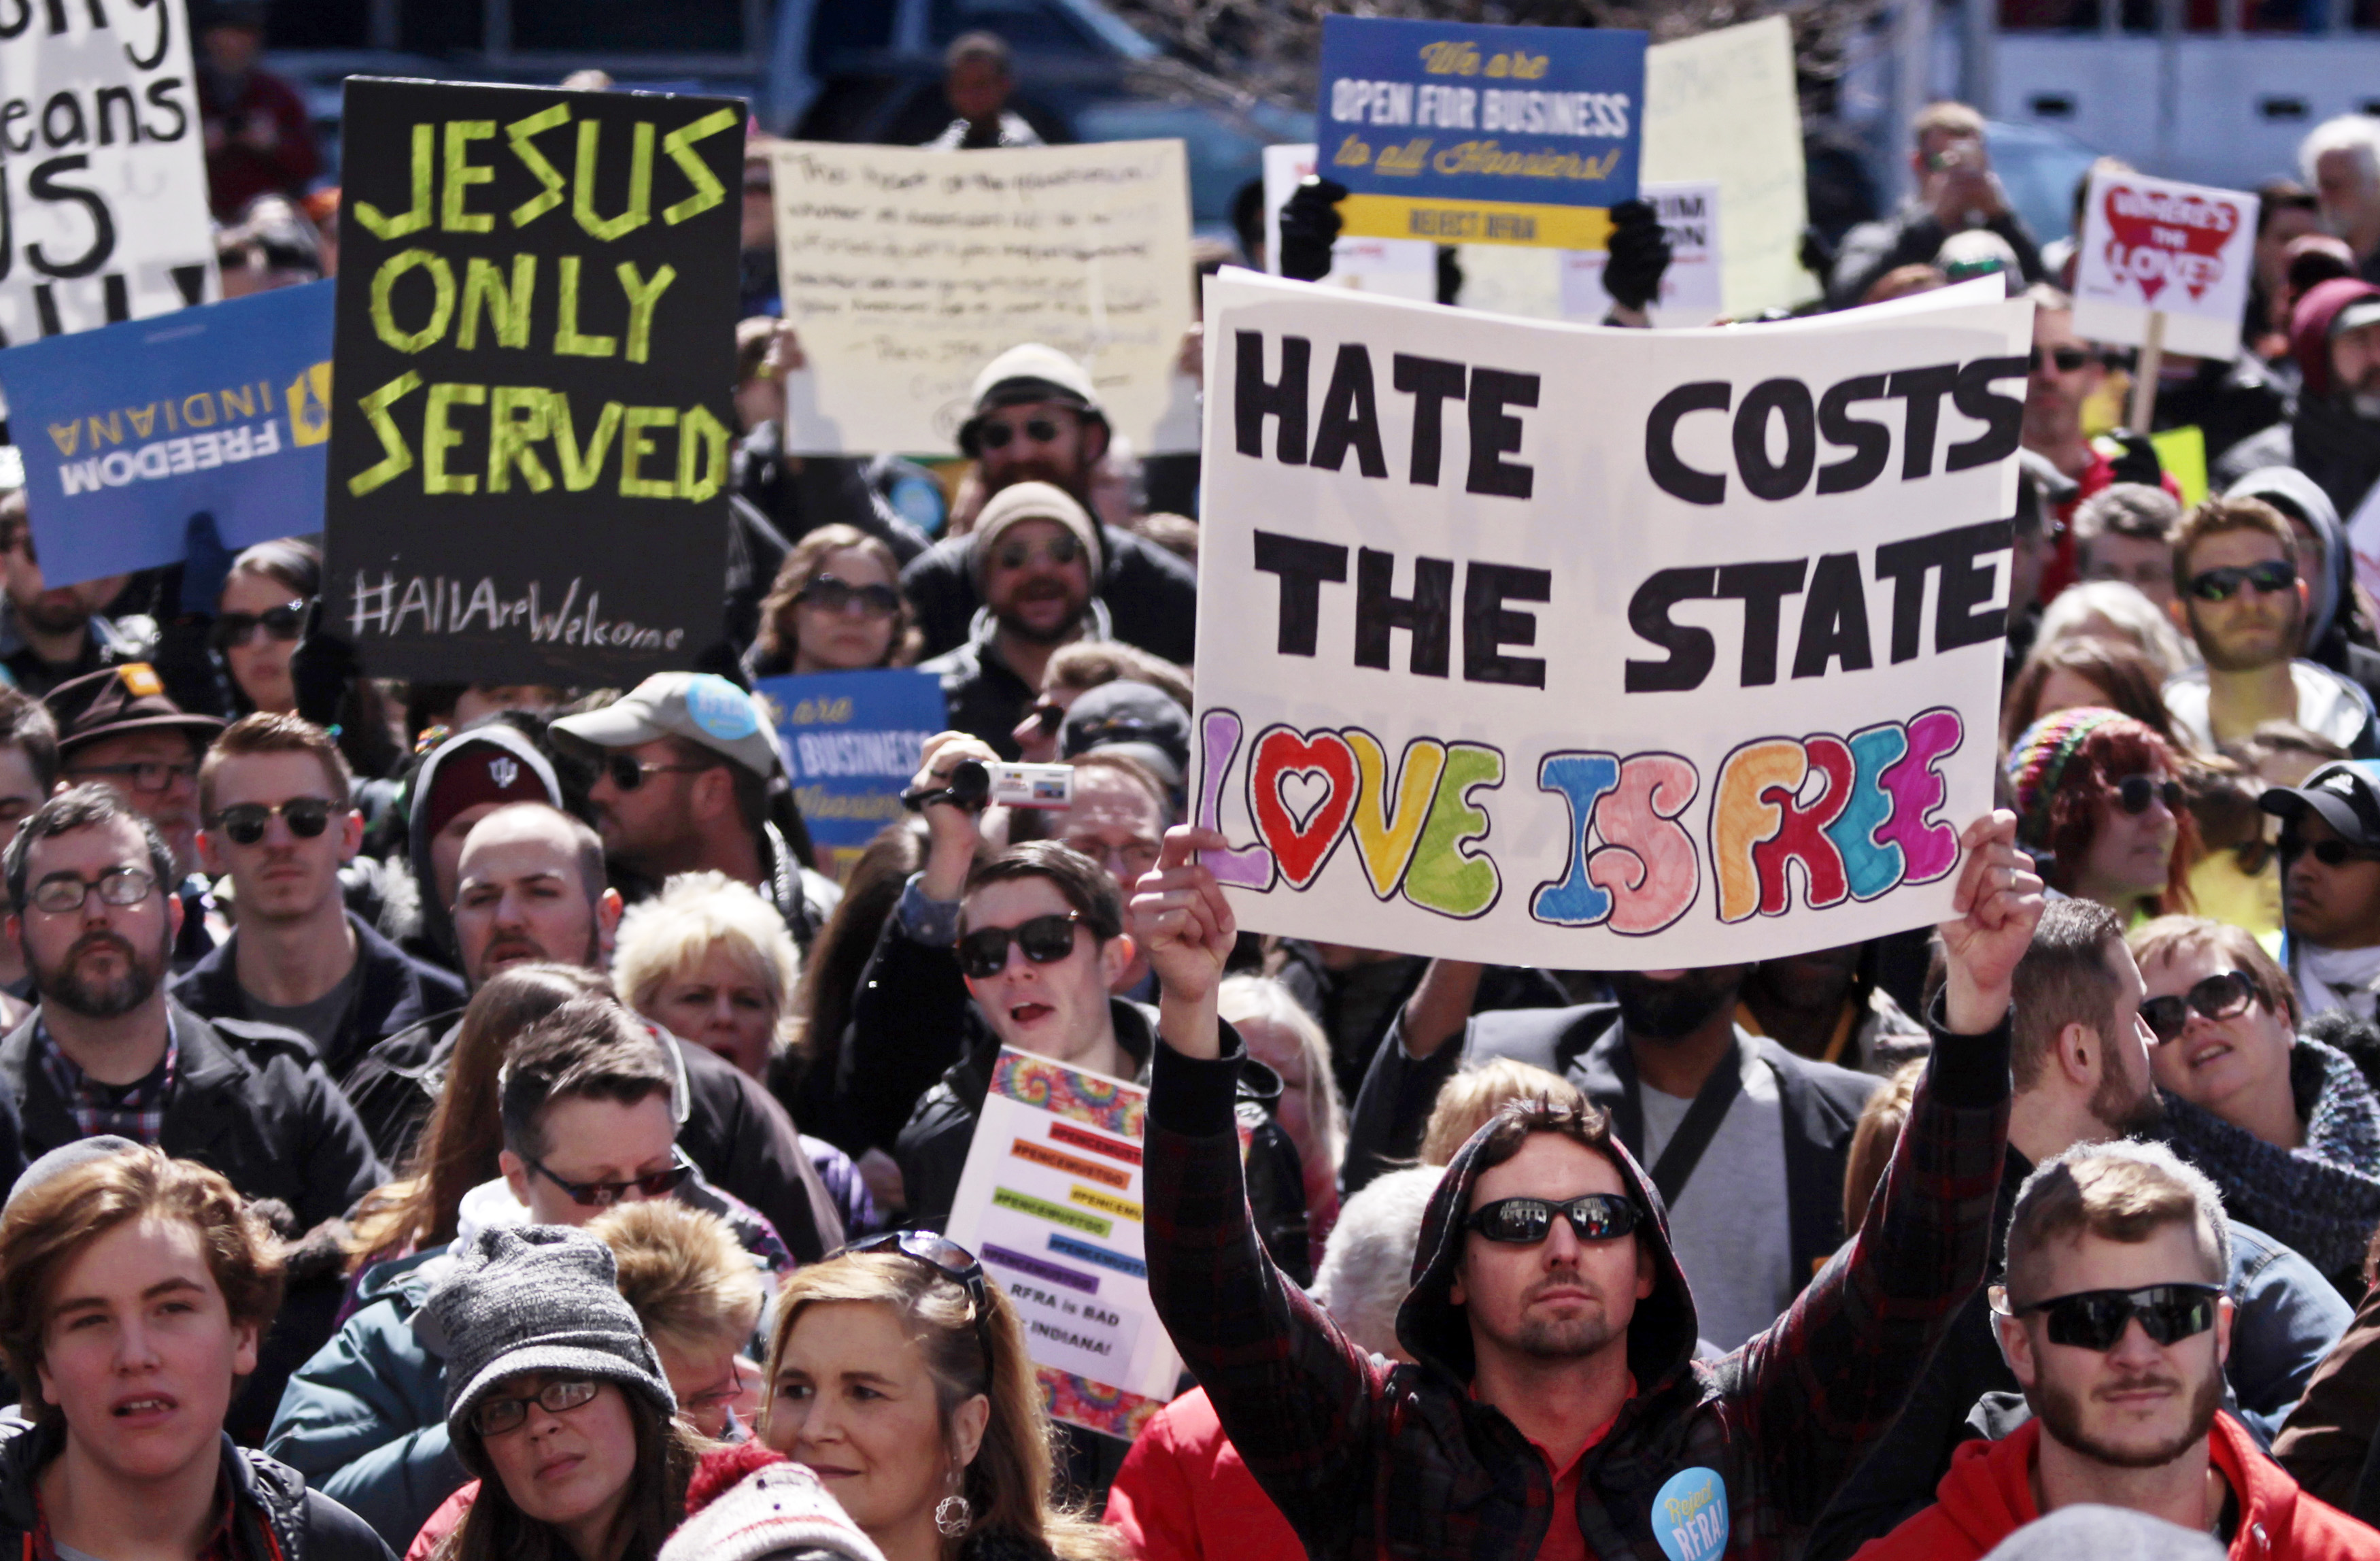 Demonstrators protest Indiana’s religious freedom bill on March 28.